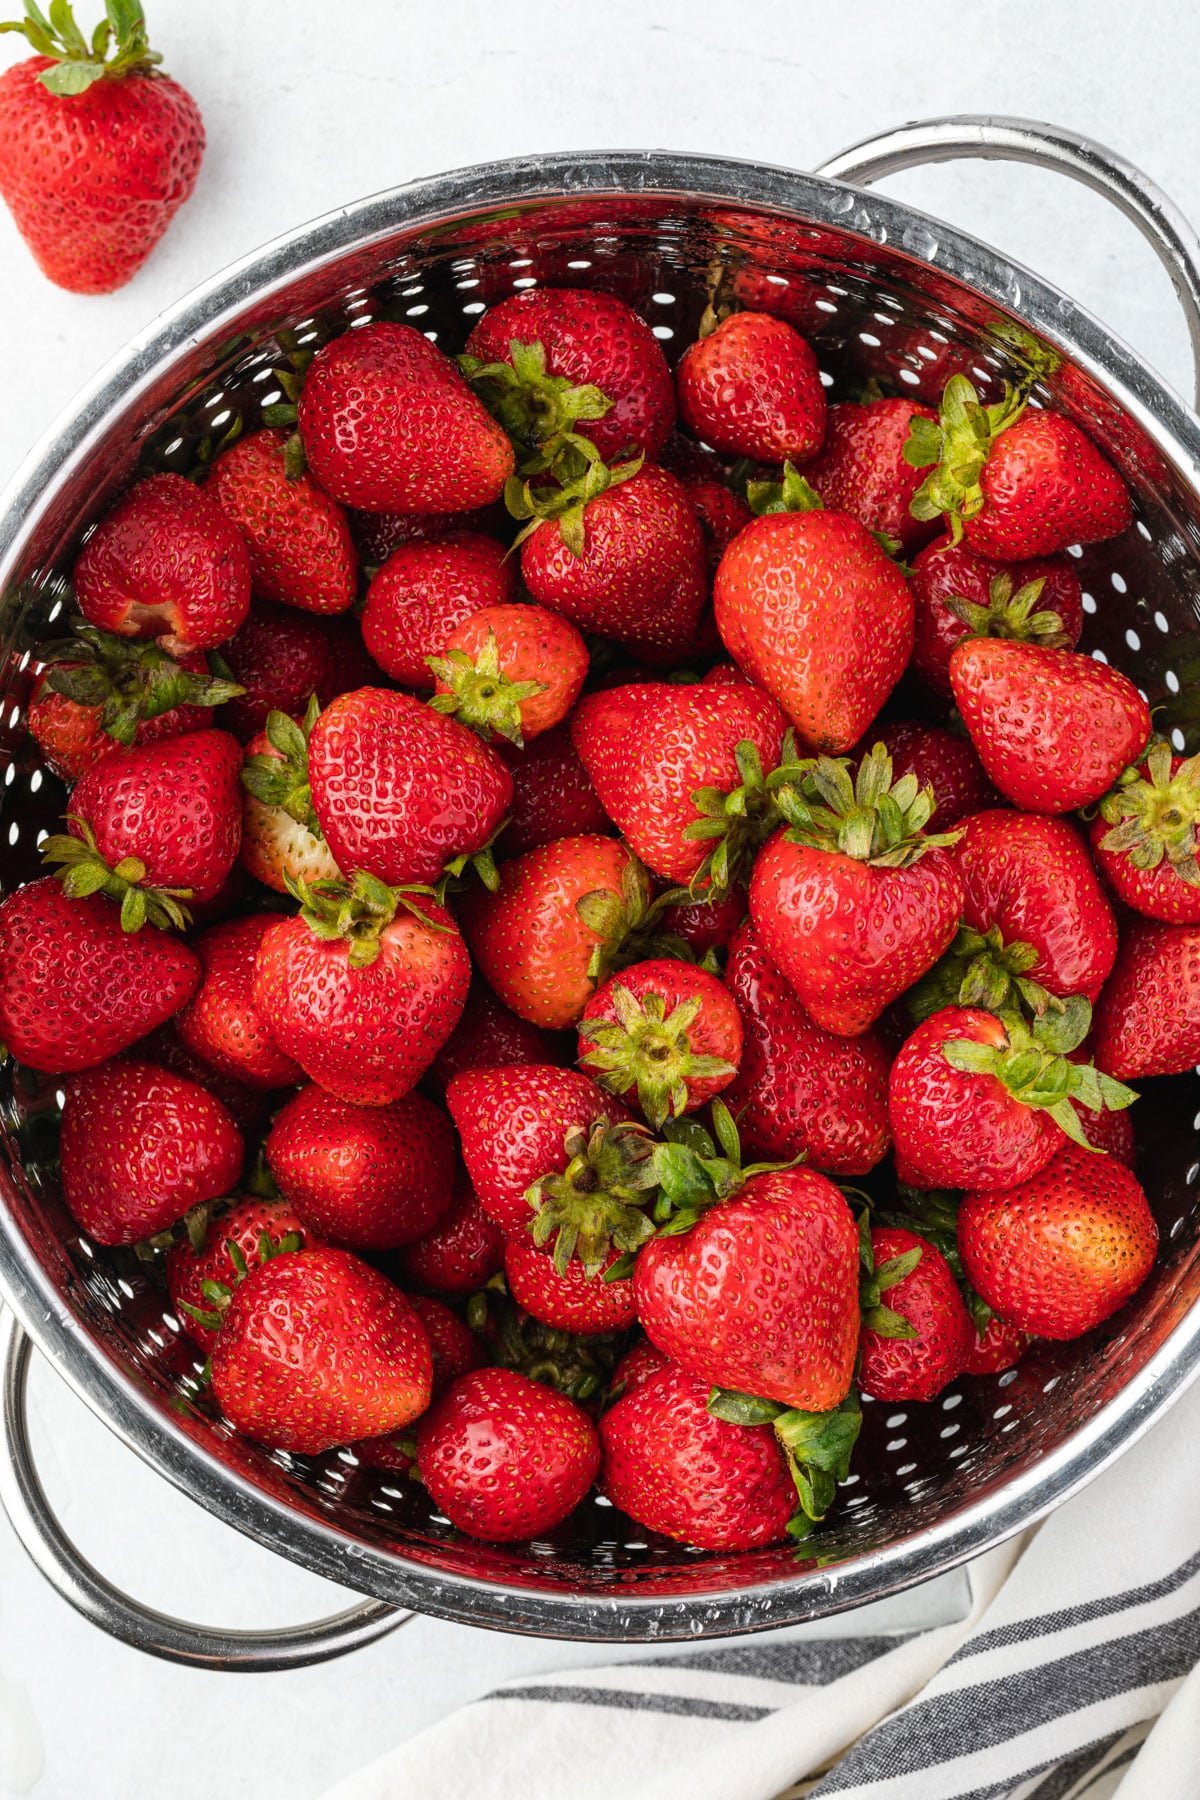 A large colander filled with freshly rinsed strawberries and one berry on the counter.